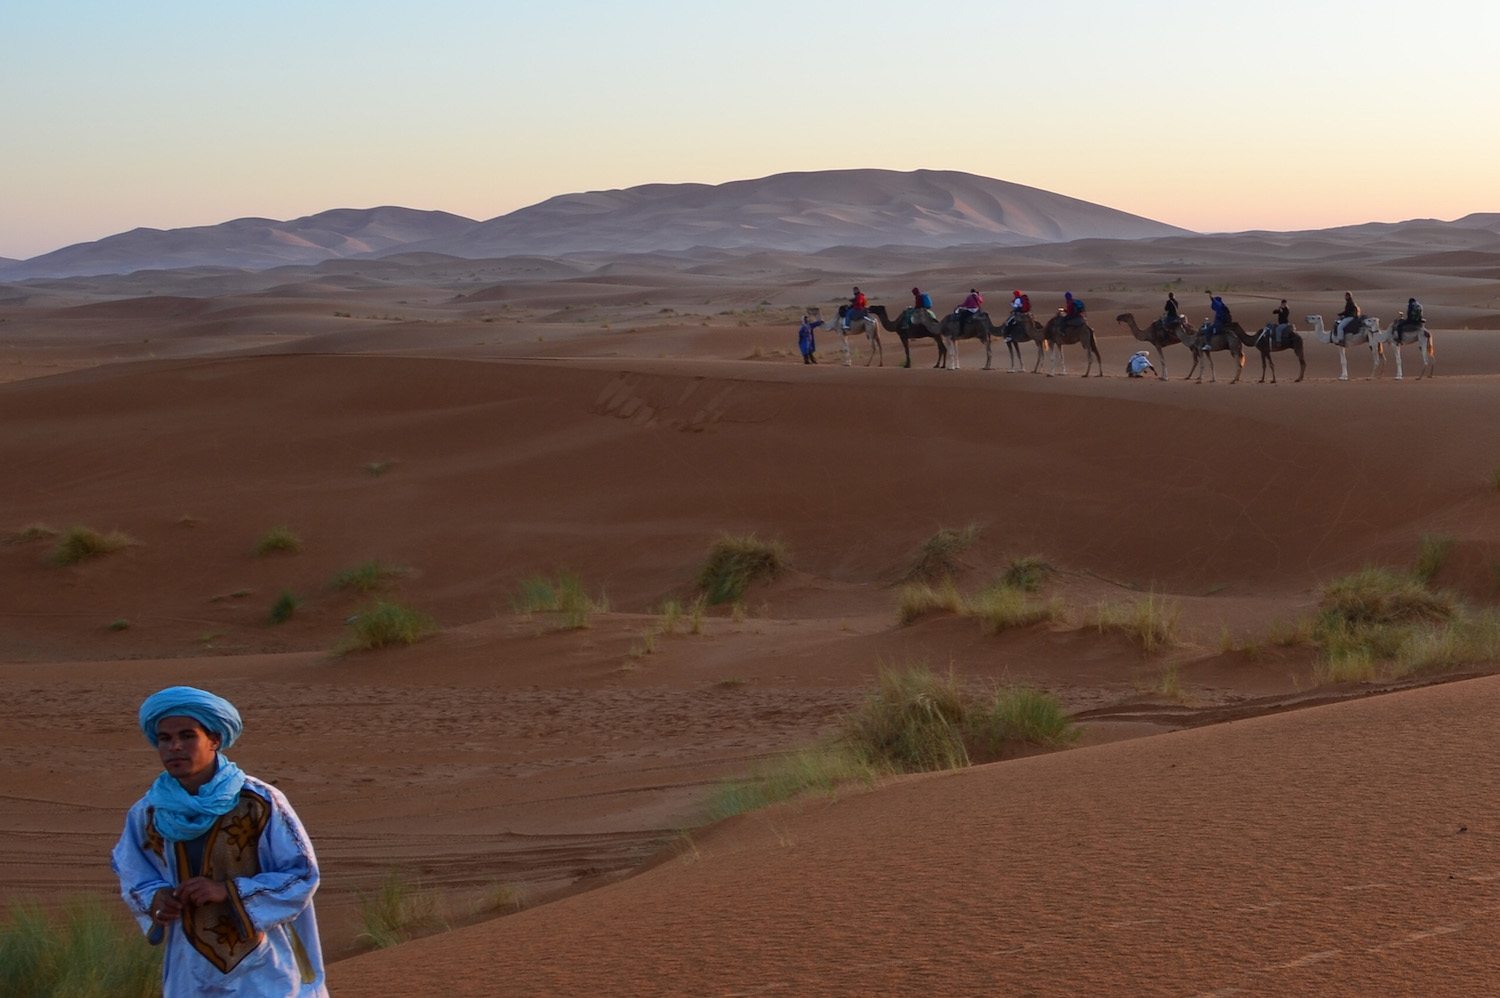 Camping, Camels and Sand Dunes